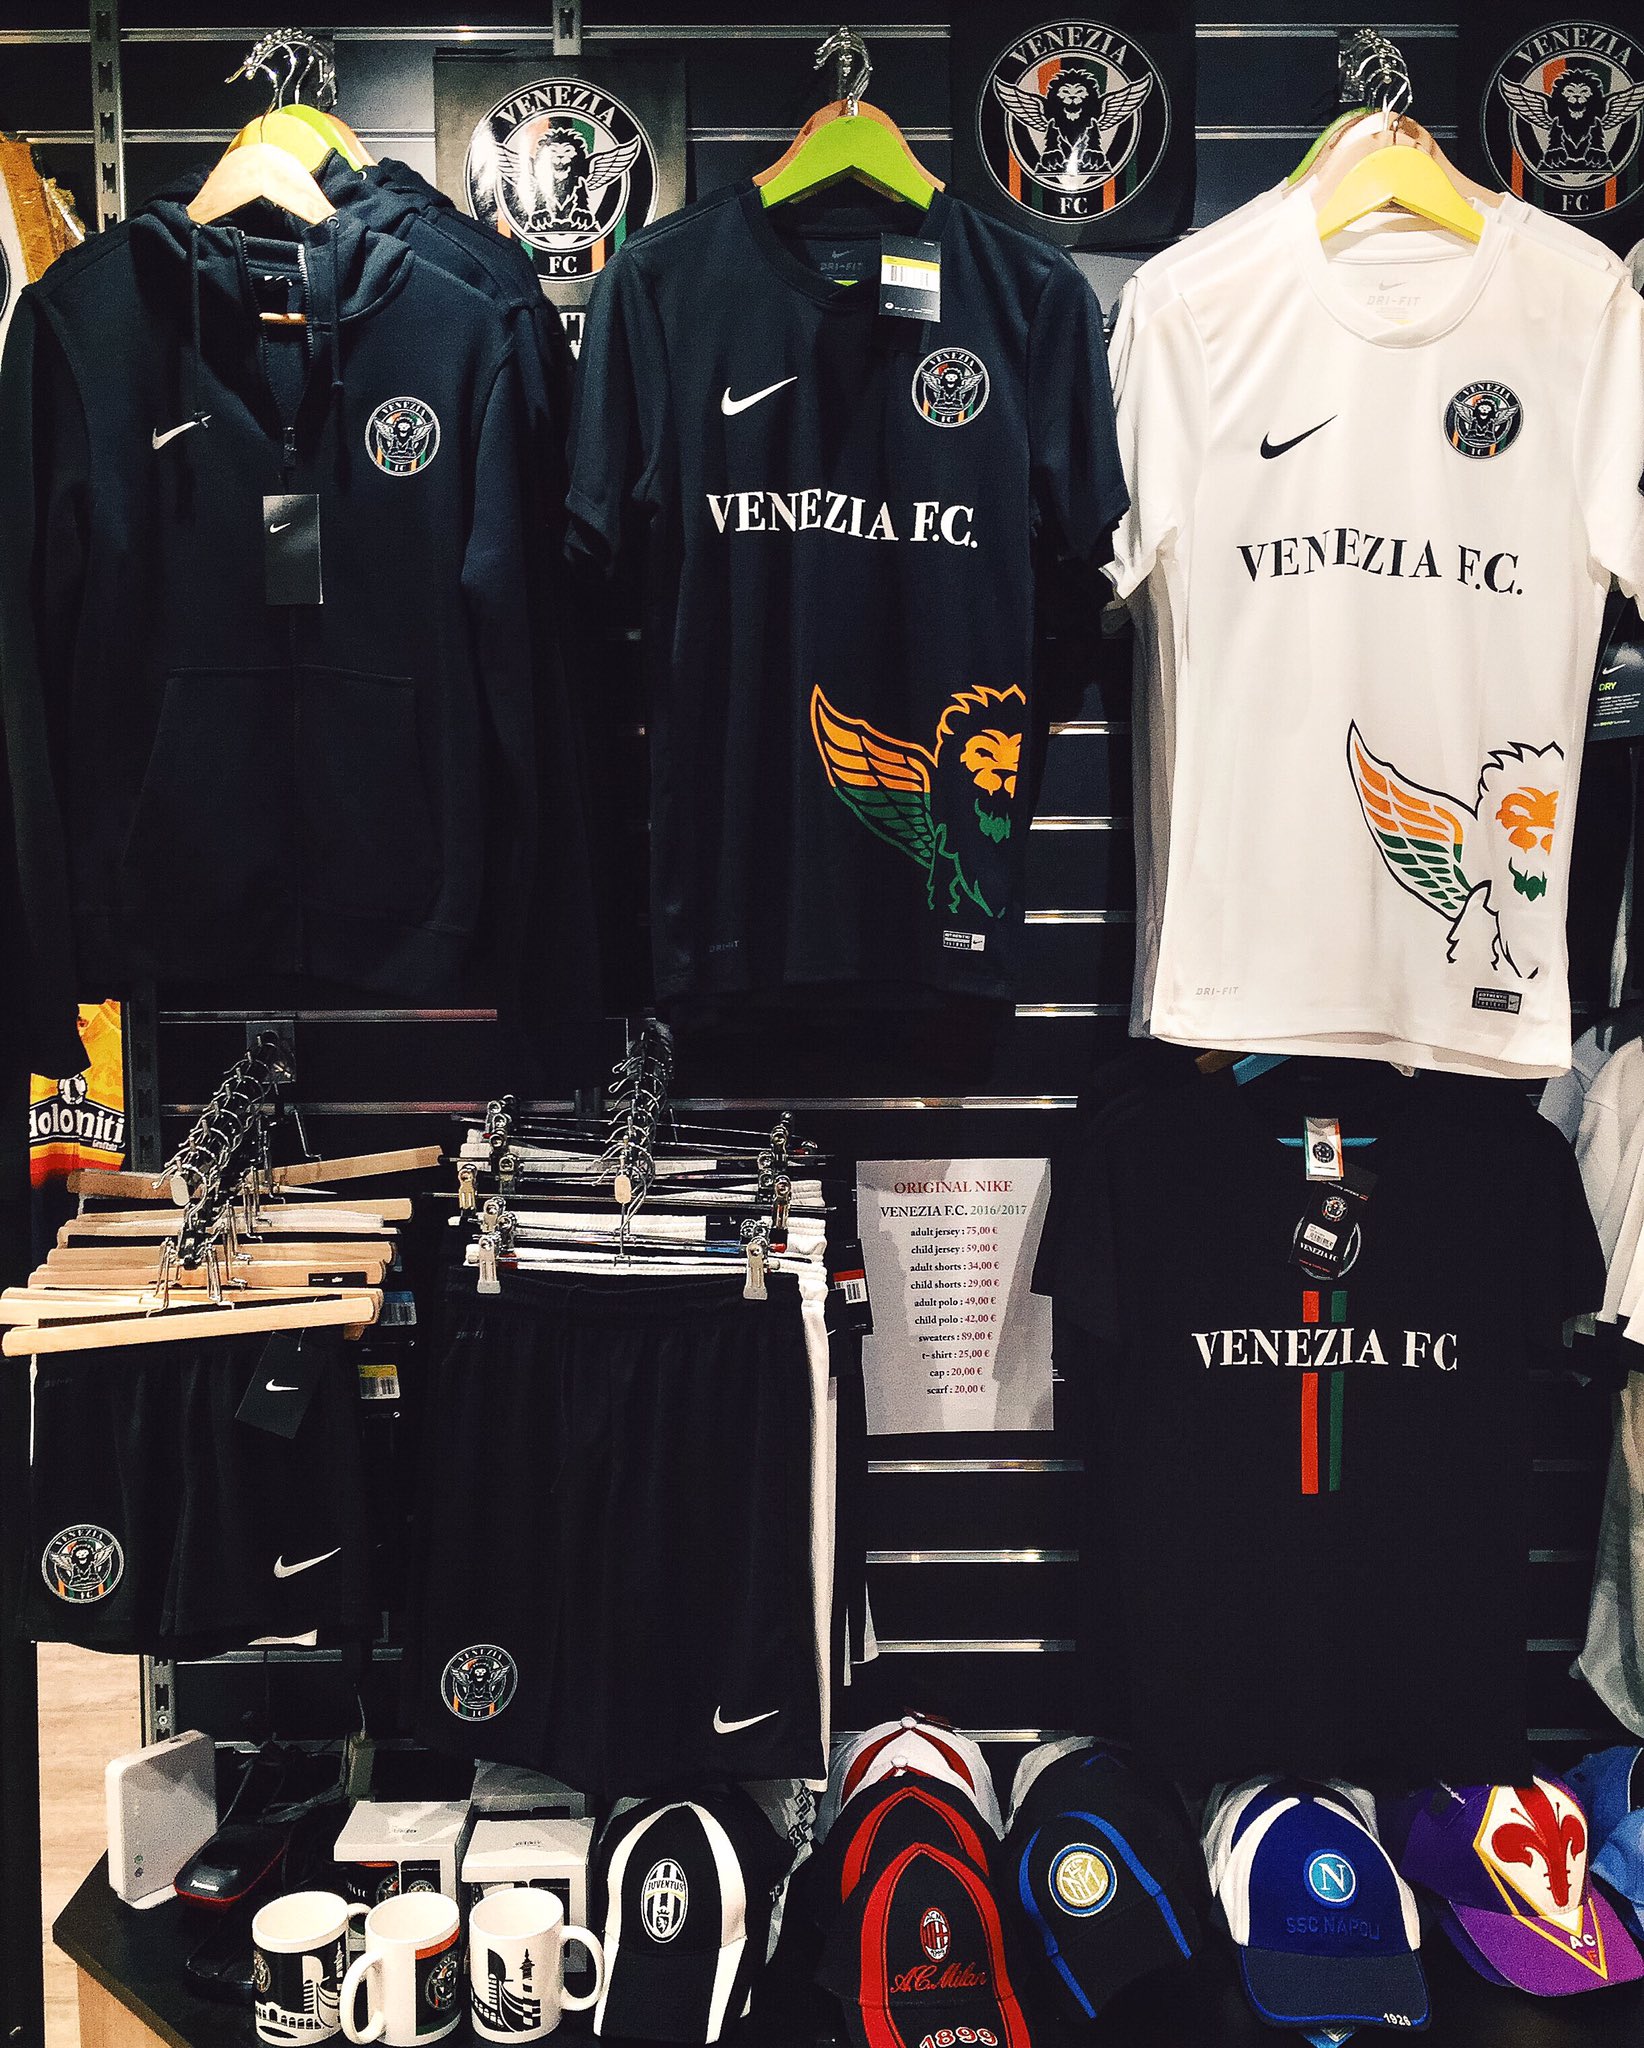 té excitación tortura Venezia FC on Twitter: "Looking to grab a jersey on your trip to Venice?  Head to Biancat e Doni for all your #VFC needs! https://t.co/6NtuOl1dnL" /  Twitter